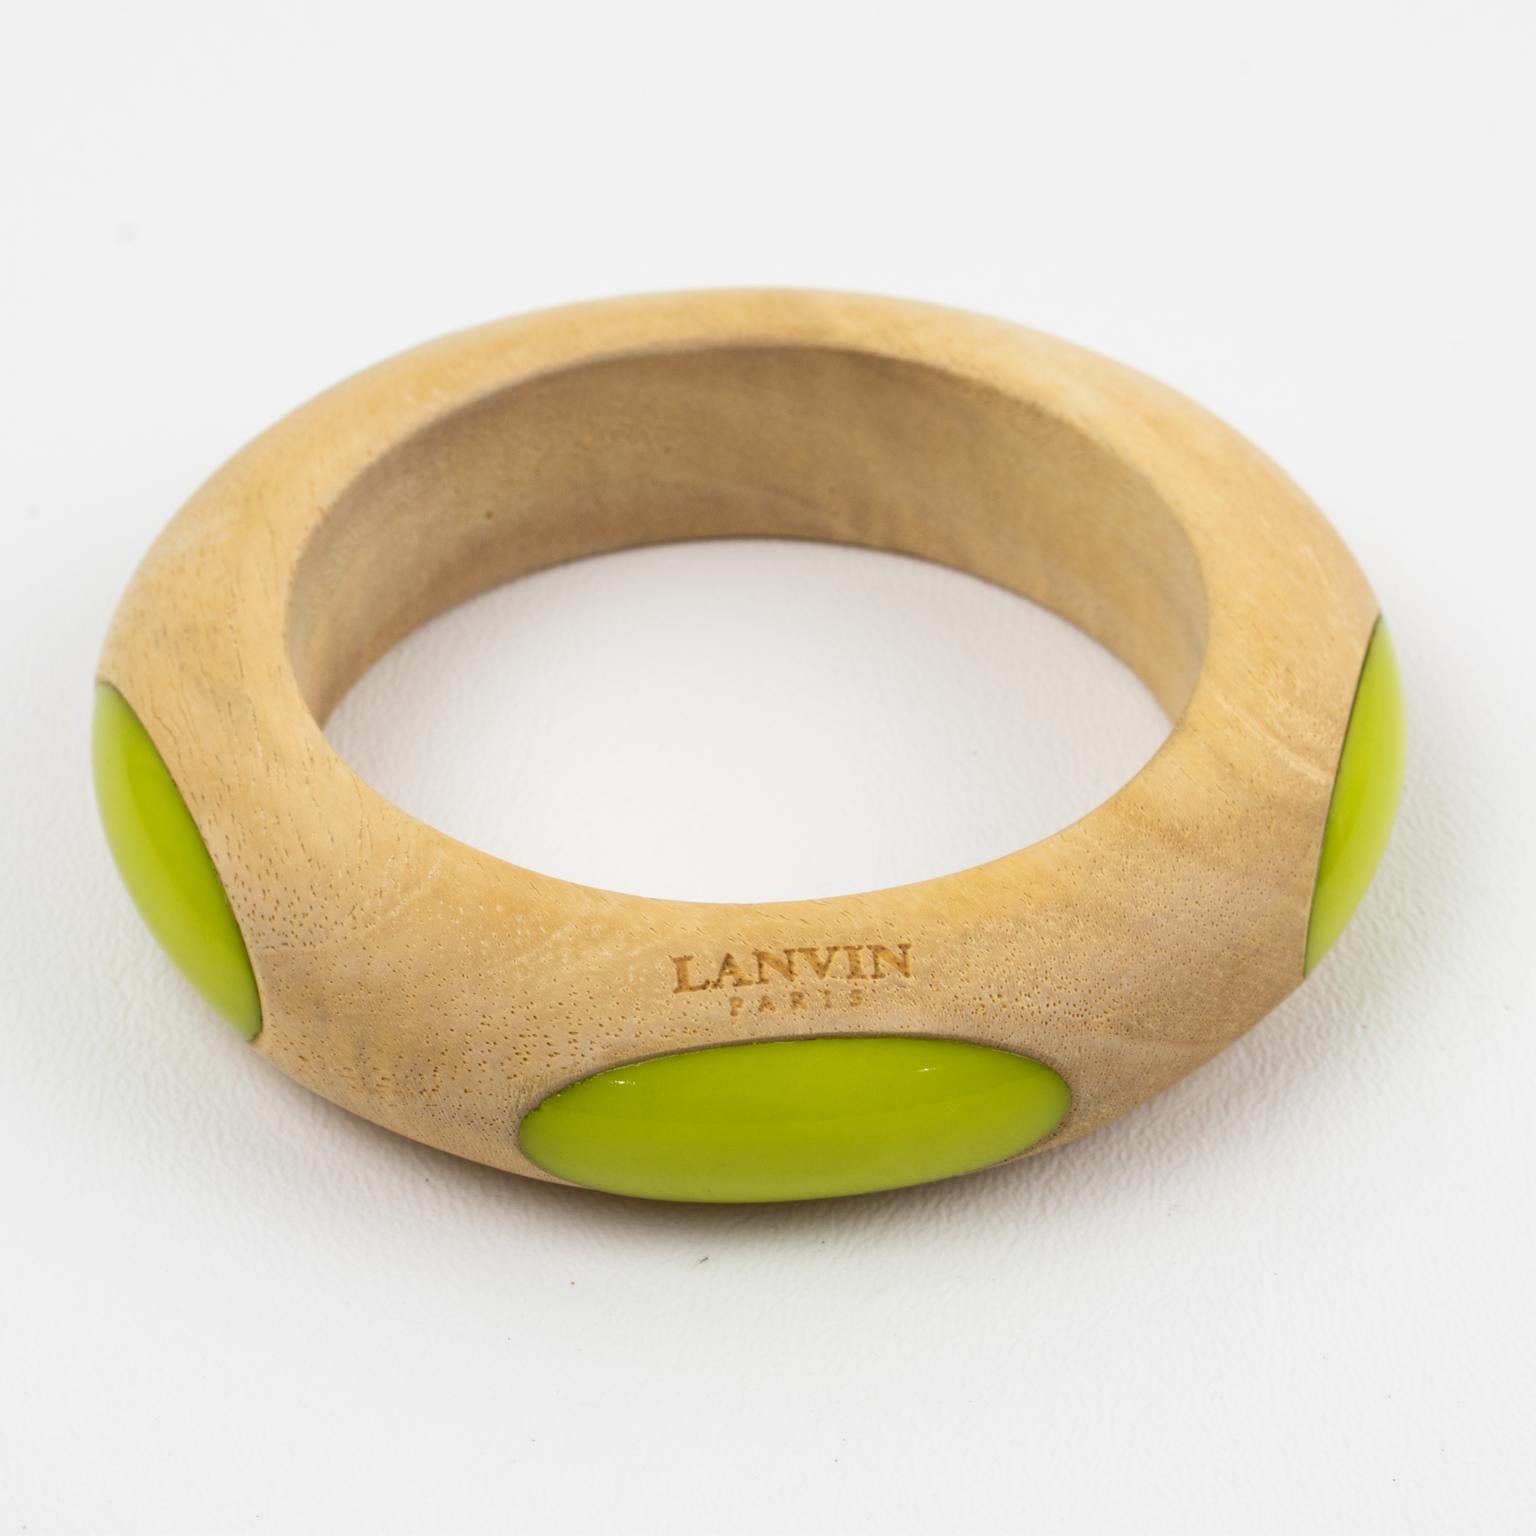 This stunning Lanvin Paris chunky Space Age or UFO flair bracelet features a light color wood bangle shape with very smooth inset ovals of resin elements. The piece boasts an avocado green color for the five resin ovoid inserts around it. Burnished